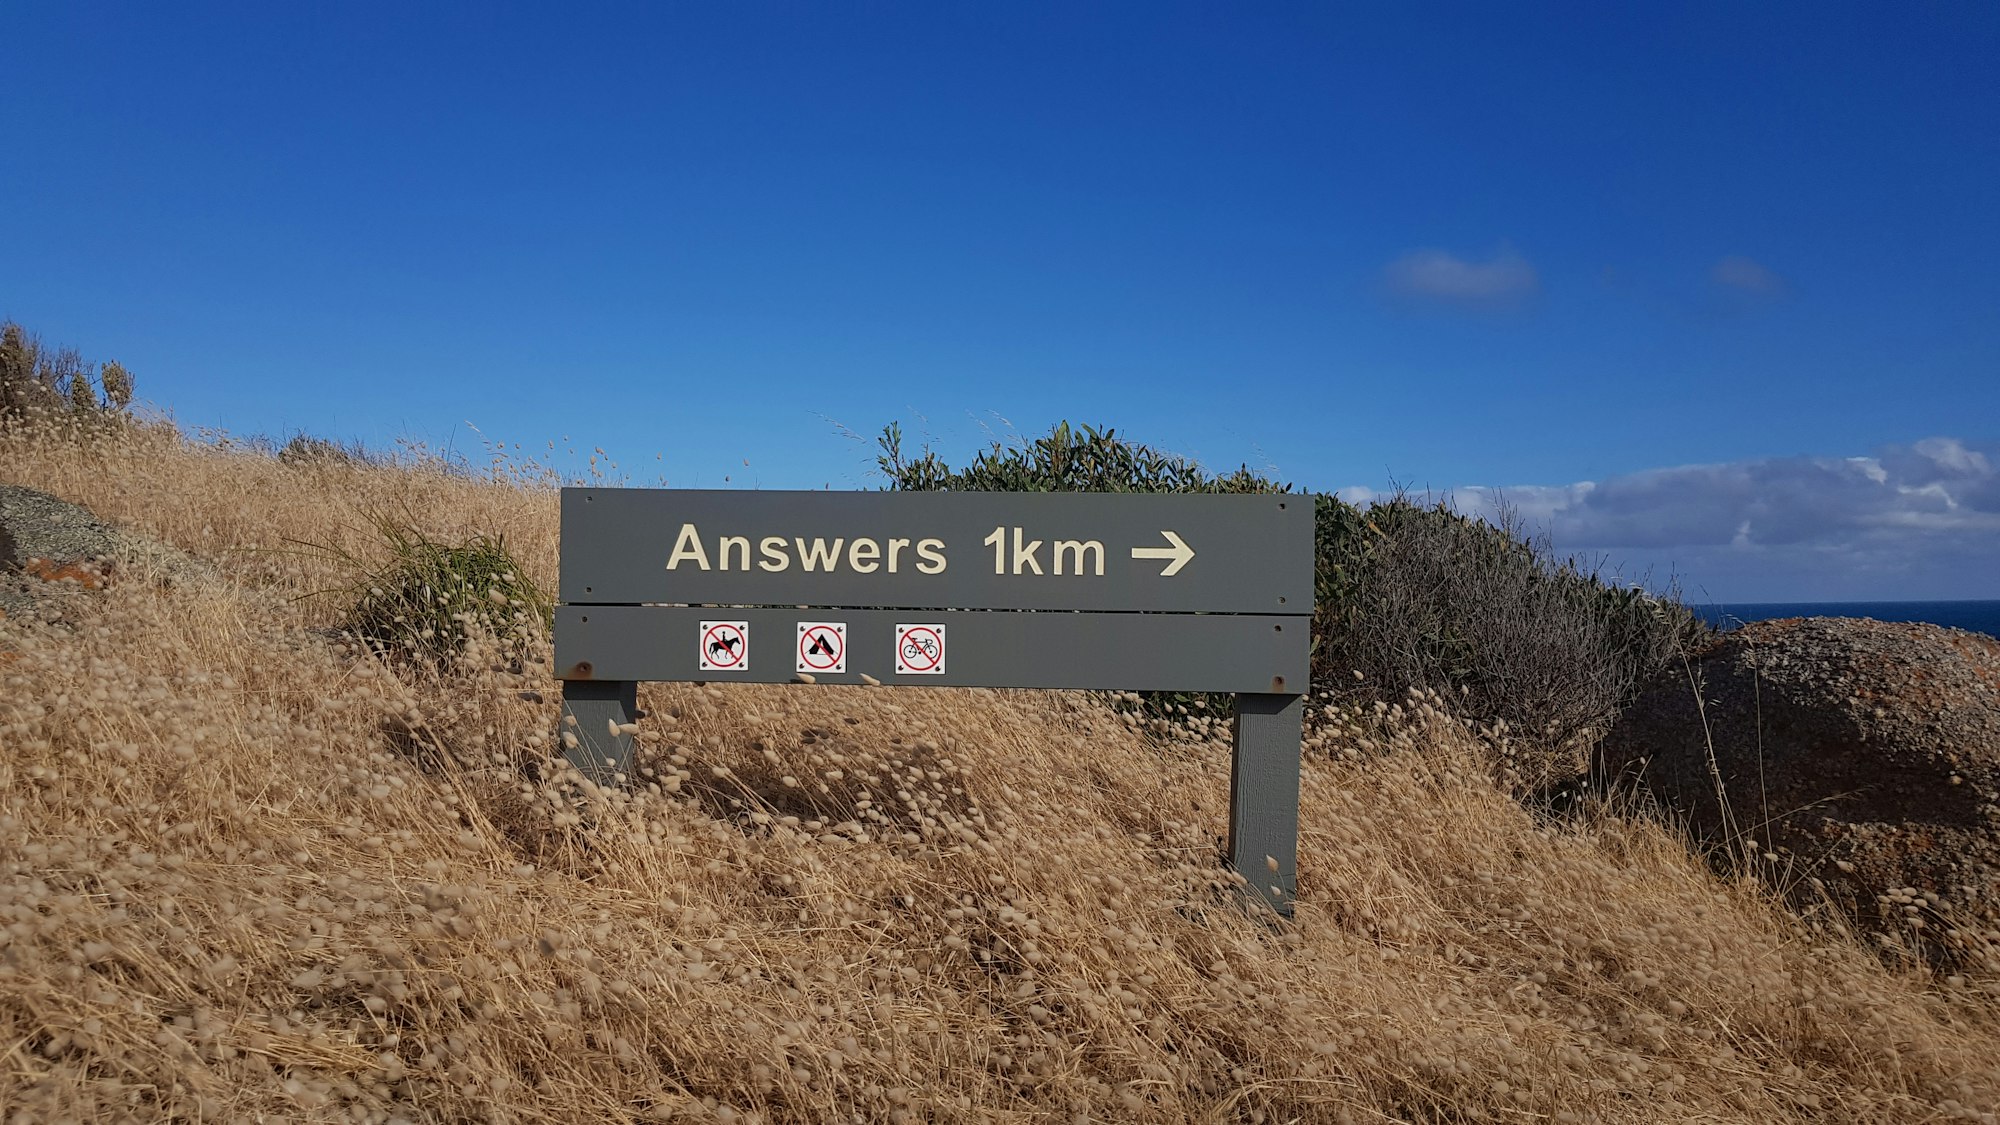 The path to your answers